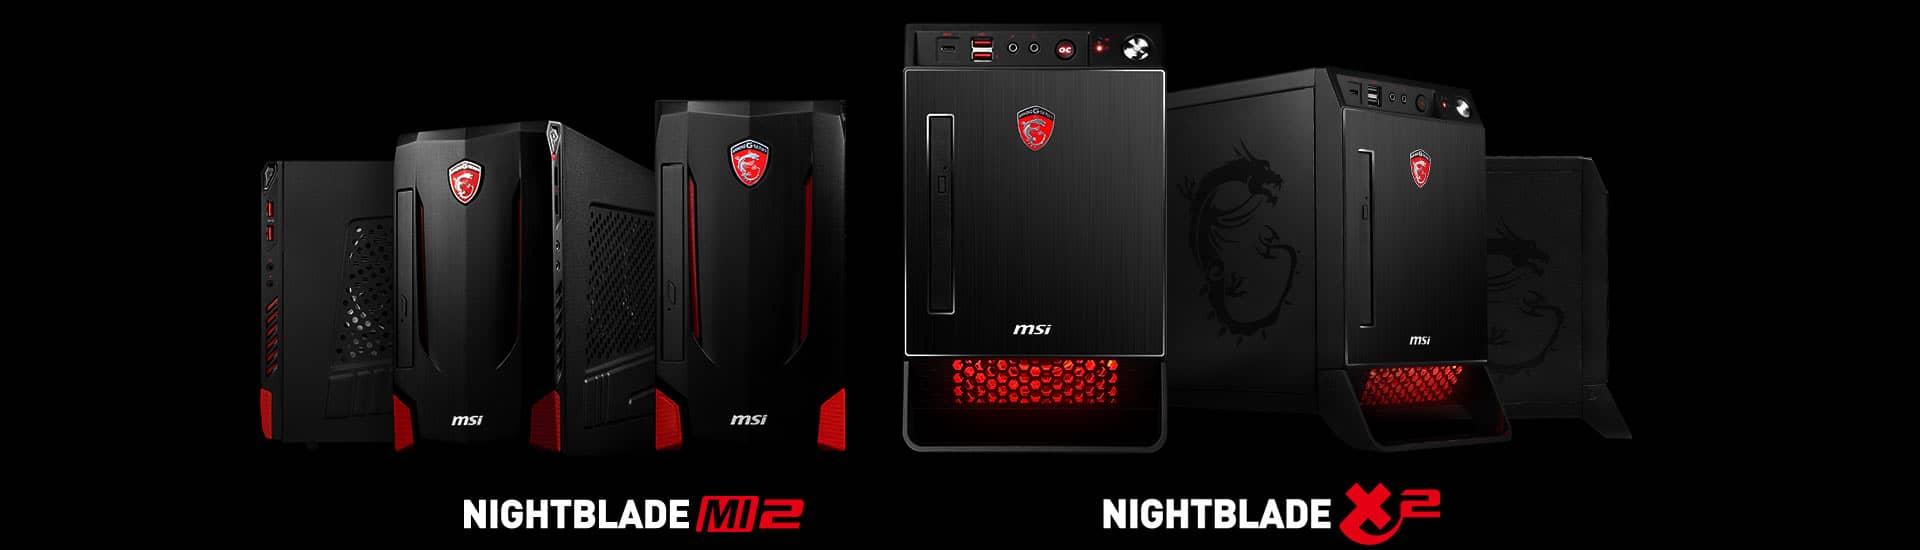 have confidence Foreman wash MSI Launches Next Generation Gaming Machines NIGHTBLADE X2 & MI2 -  EnosTech.com